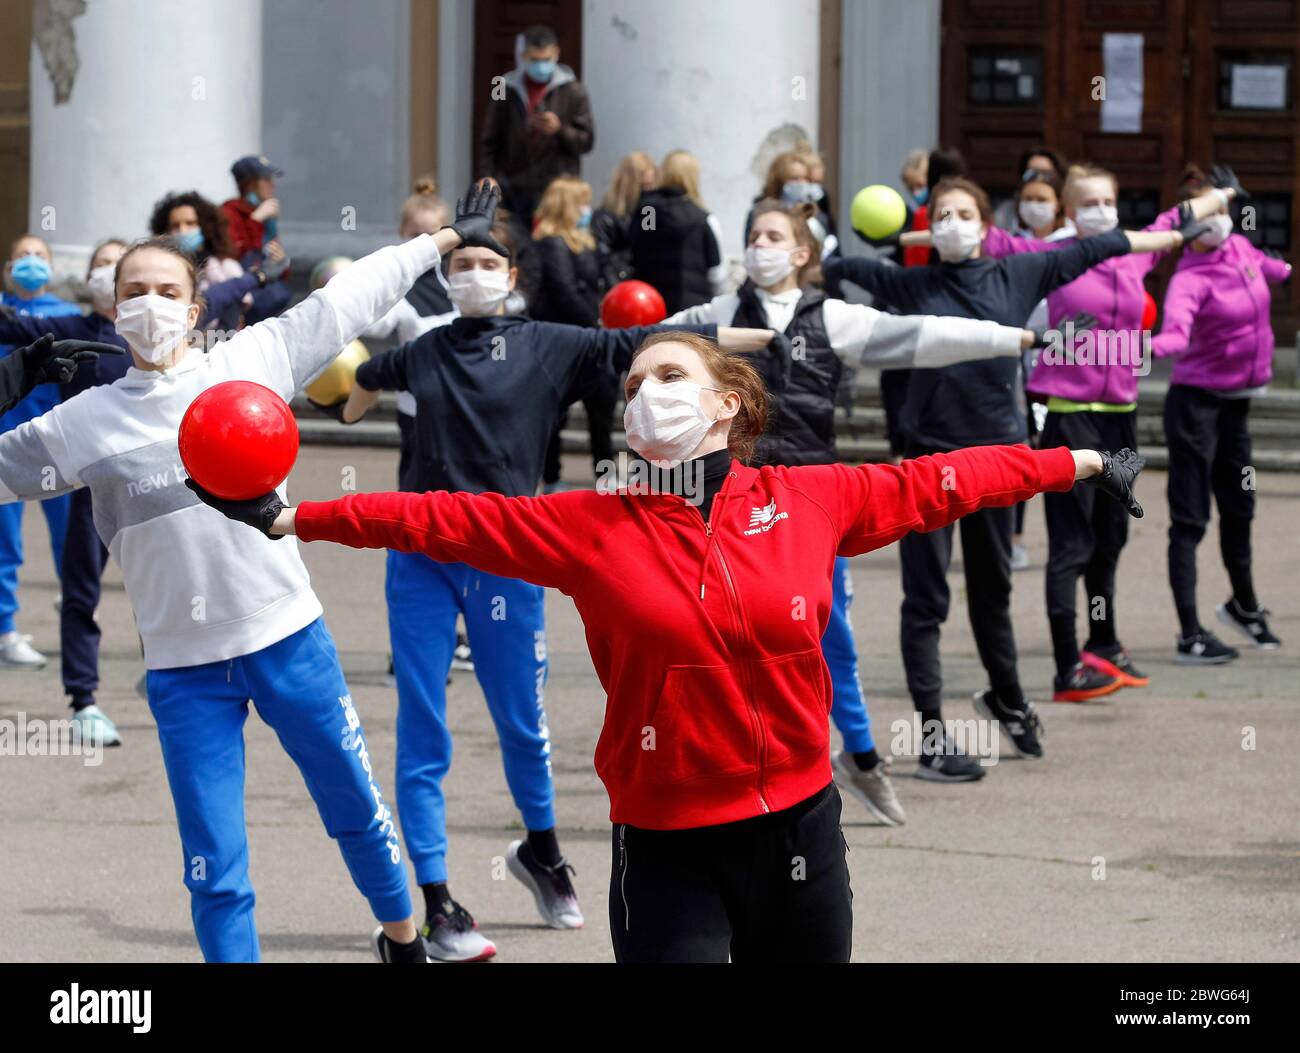 Gymnasts wearing face masks as a preventive measure against the spread of COVID-19 coronavirus perform during an open-air training session.Young gymnasts of Ukrainian Deriugina School staged an open-air training session to raise awareness on the situation of the Deriugina School with no building for training, because the rental agreement for the club's training facility expired. The Deriugina School is known rhythmic gymnastics club by the former world champion Irina Deriugina, her coach and mom Albina Deriugina. Irina Deriugina is a former Soviet individual rhythmic gymnast from Ukraine and U Stock Photo